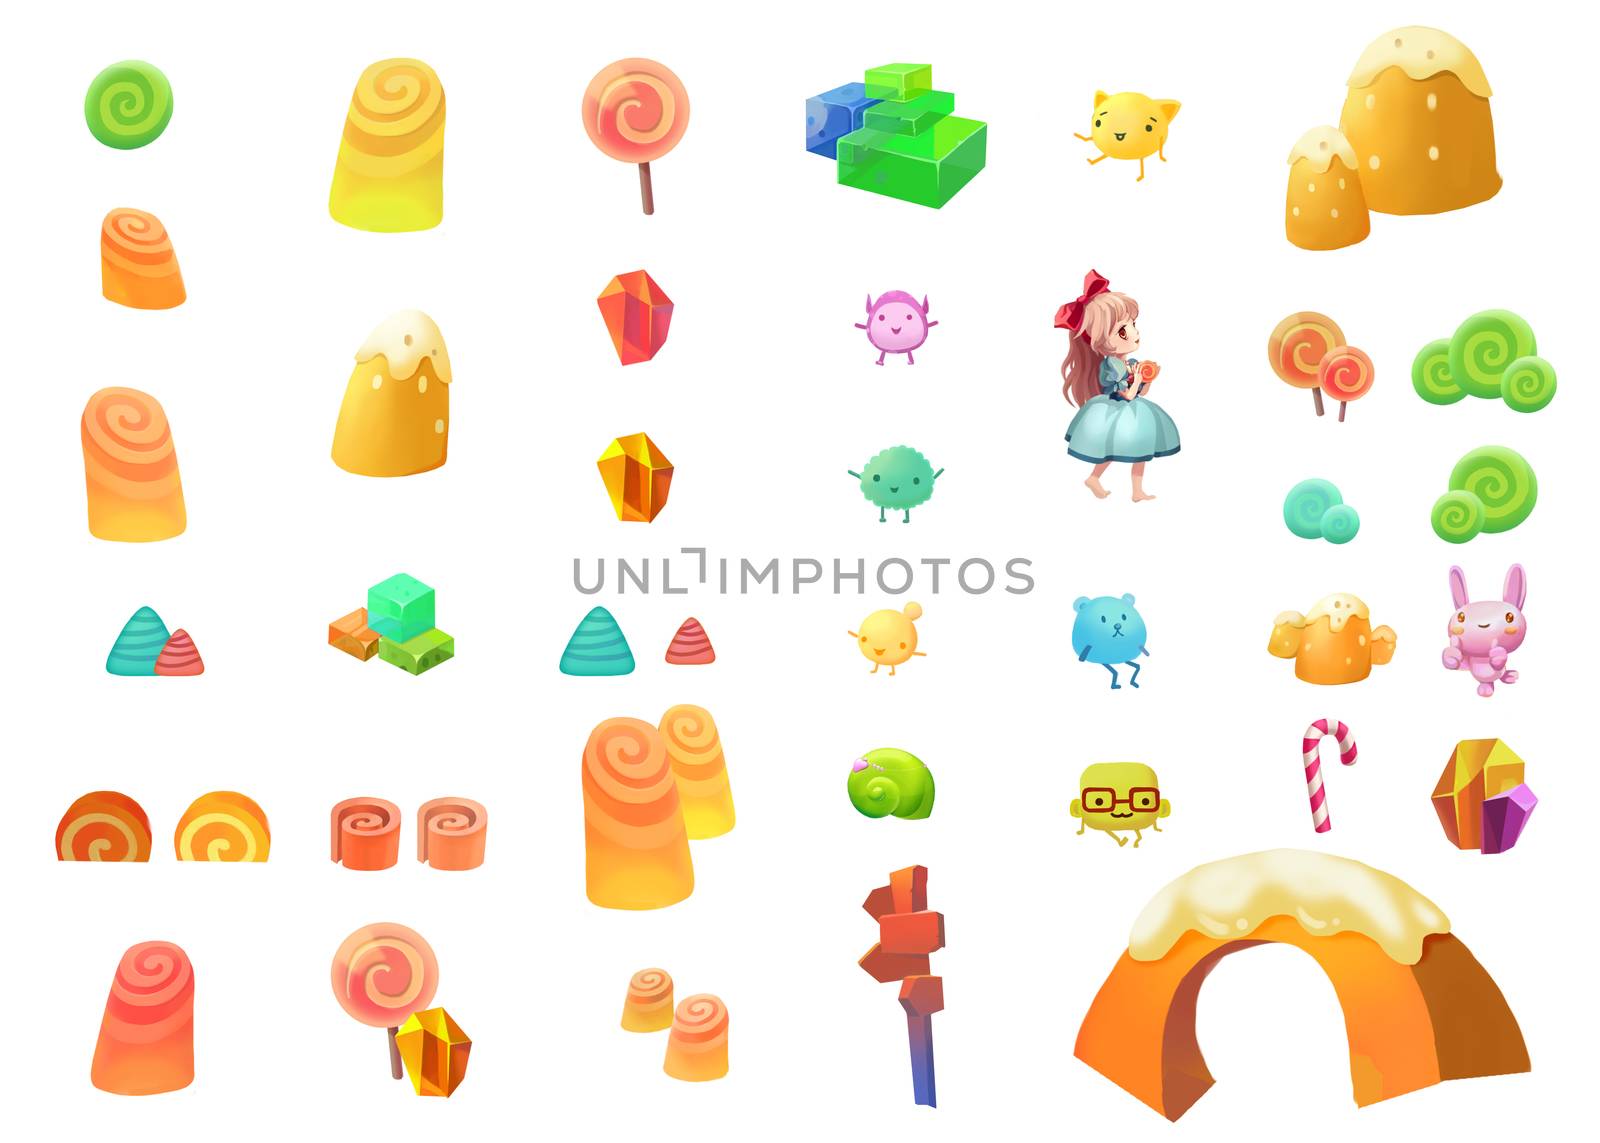 Illustrative Elements of Candy Land with White Background. Fantastic Style. by NextMars